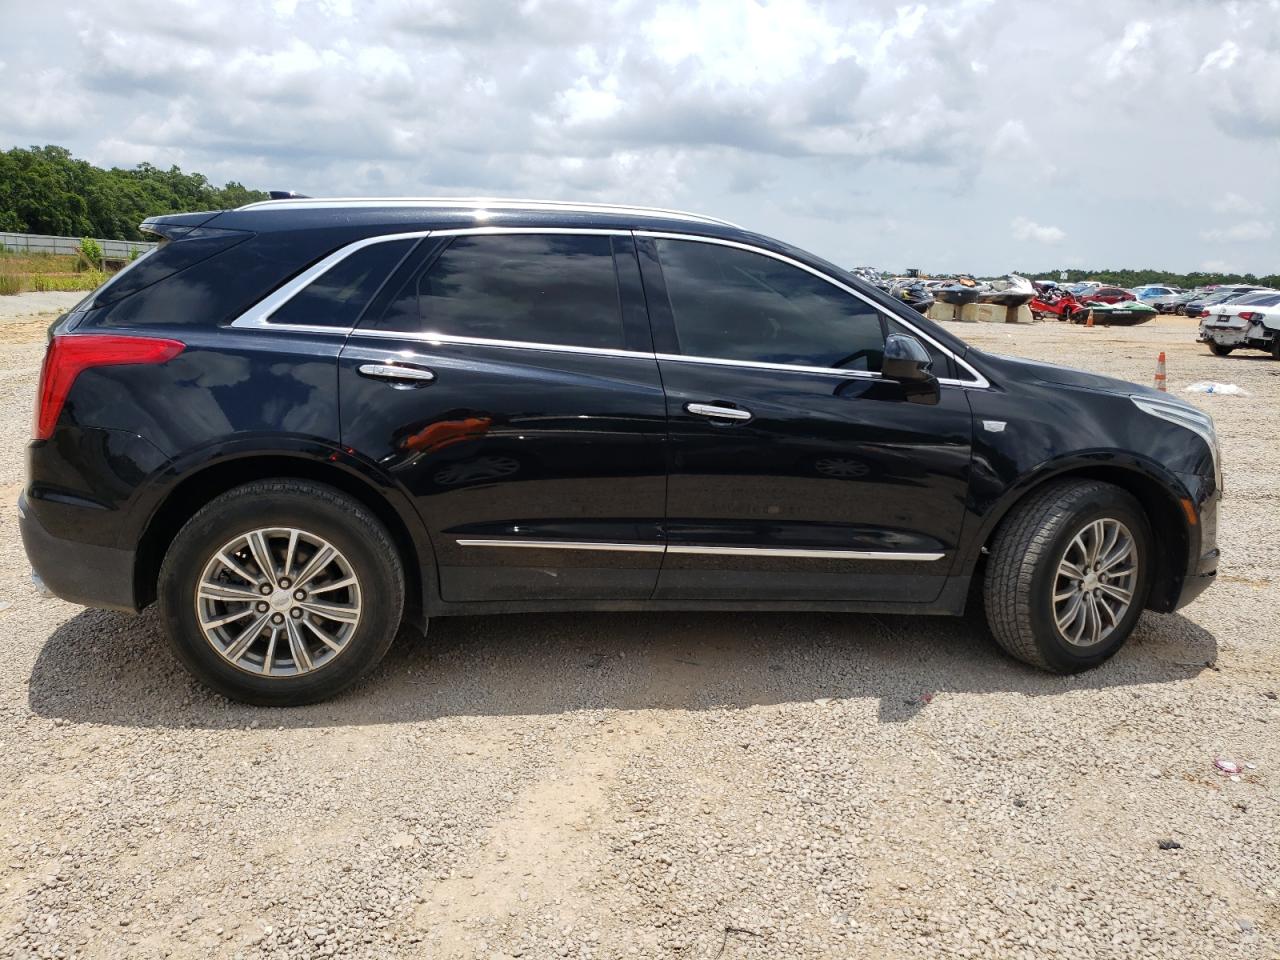 1GYKNBRS6HZ****** Salvage and Repairable 2017 Cadillac XT5 in AL - Theodore